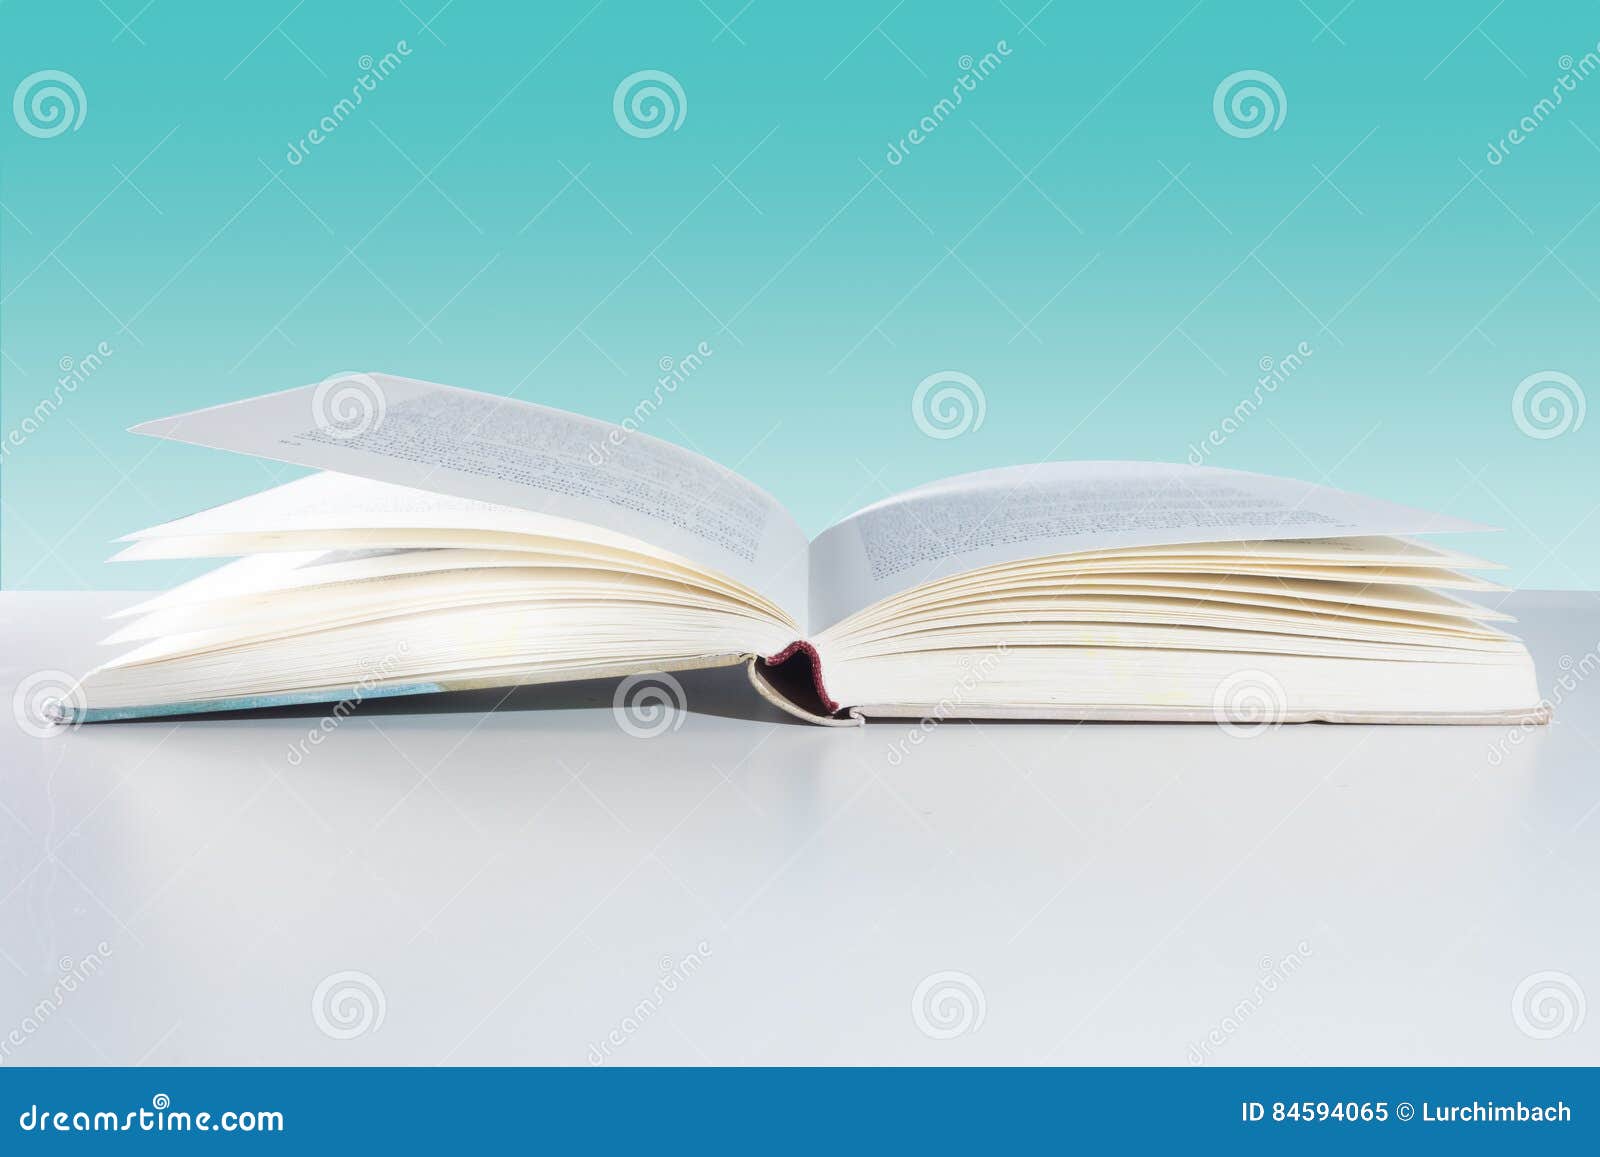 book with background